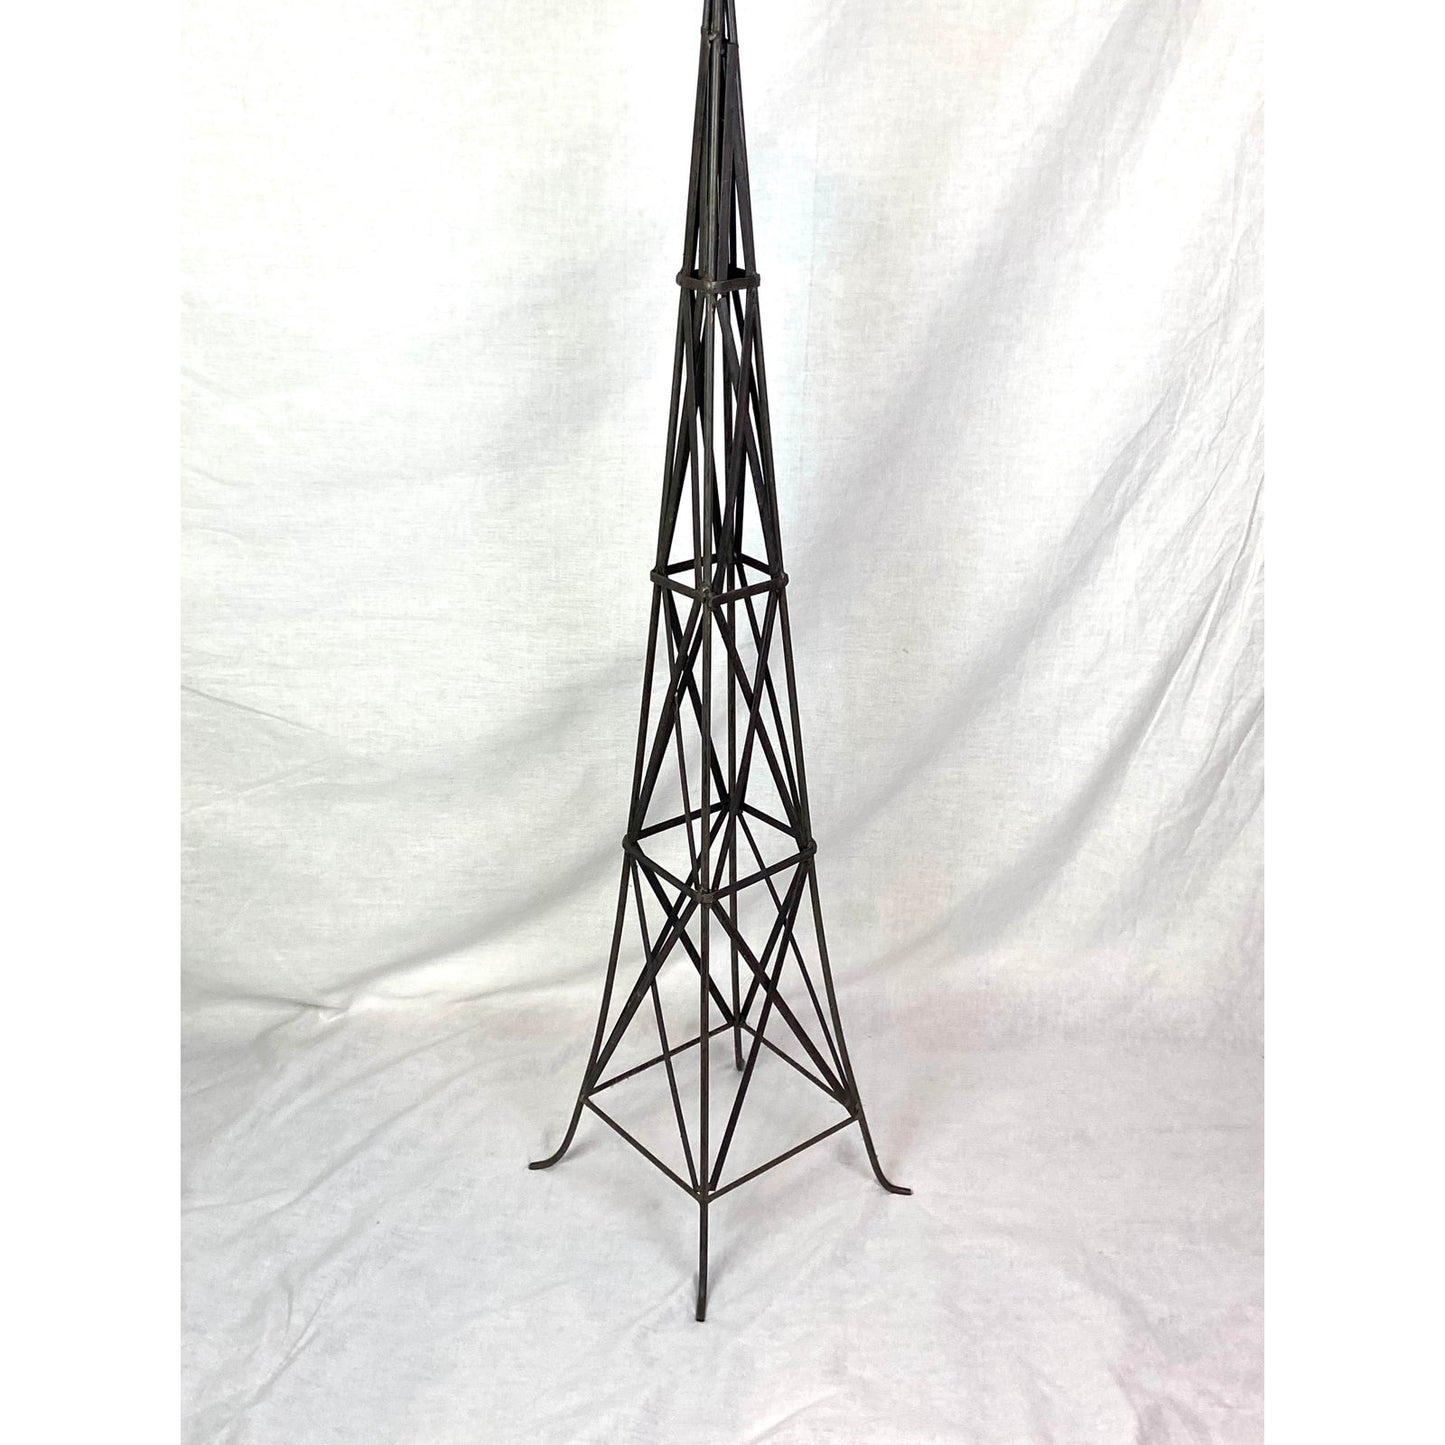 [SOLD] Industrial Modern Iron Tower Sculpture Candle Holder